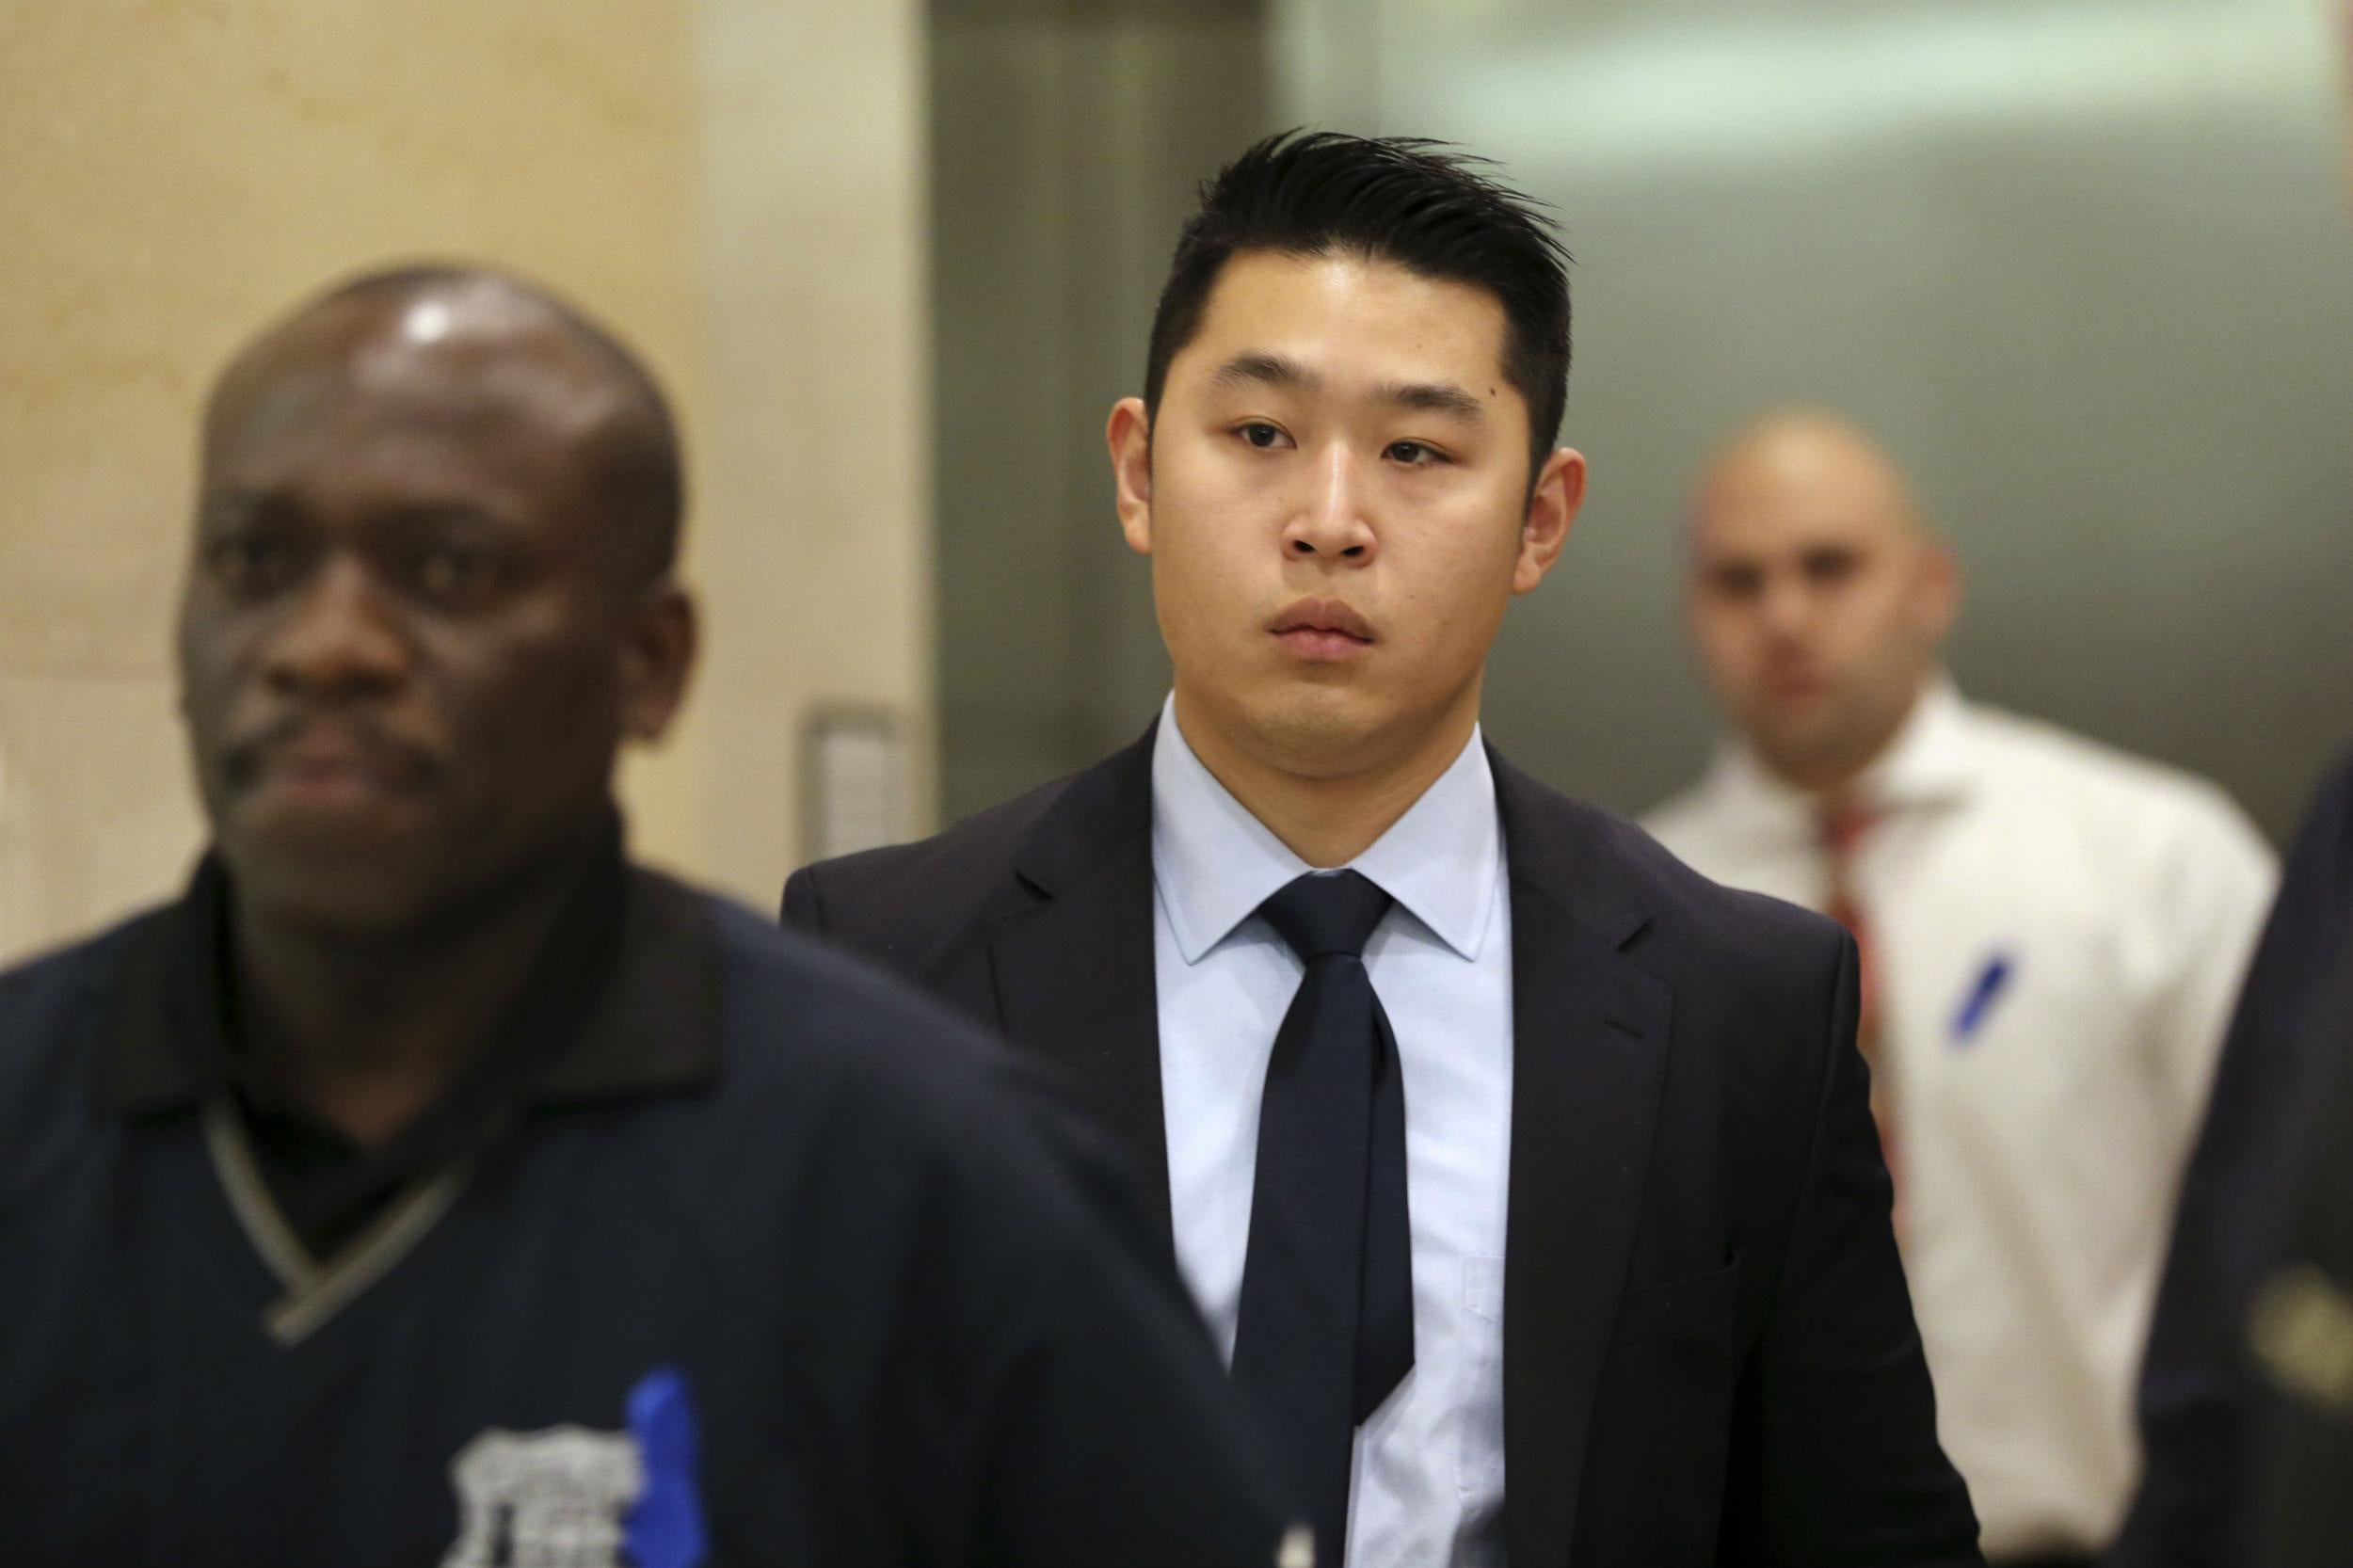 28-year-old Peter Liang faces up to 15 years in prison but the prosecutor will not press for it